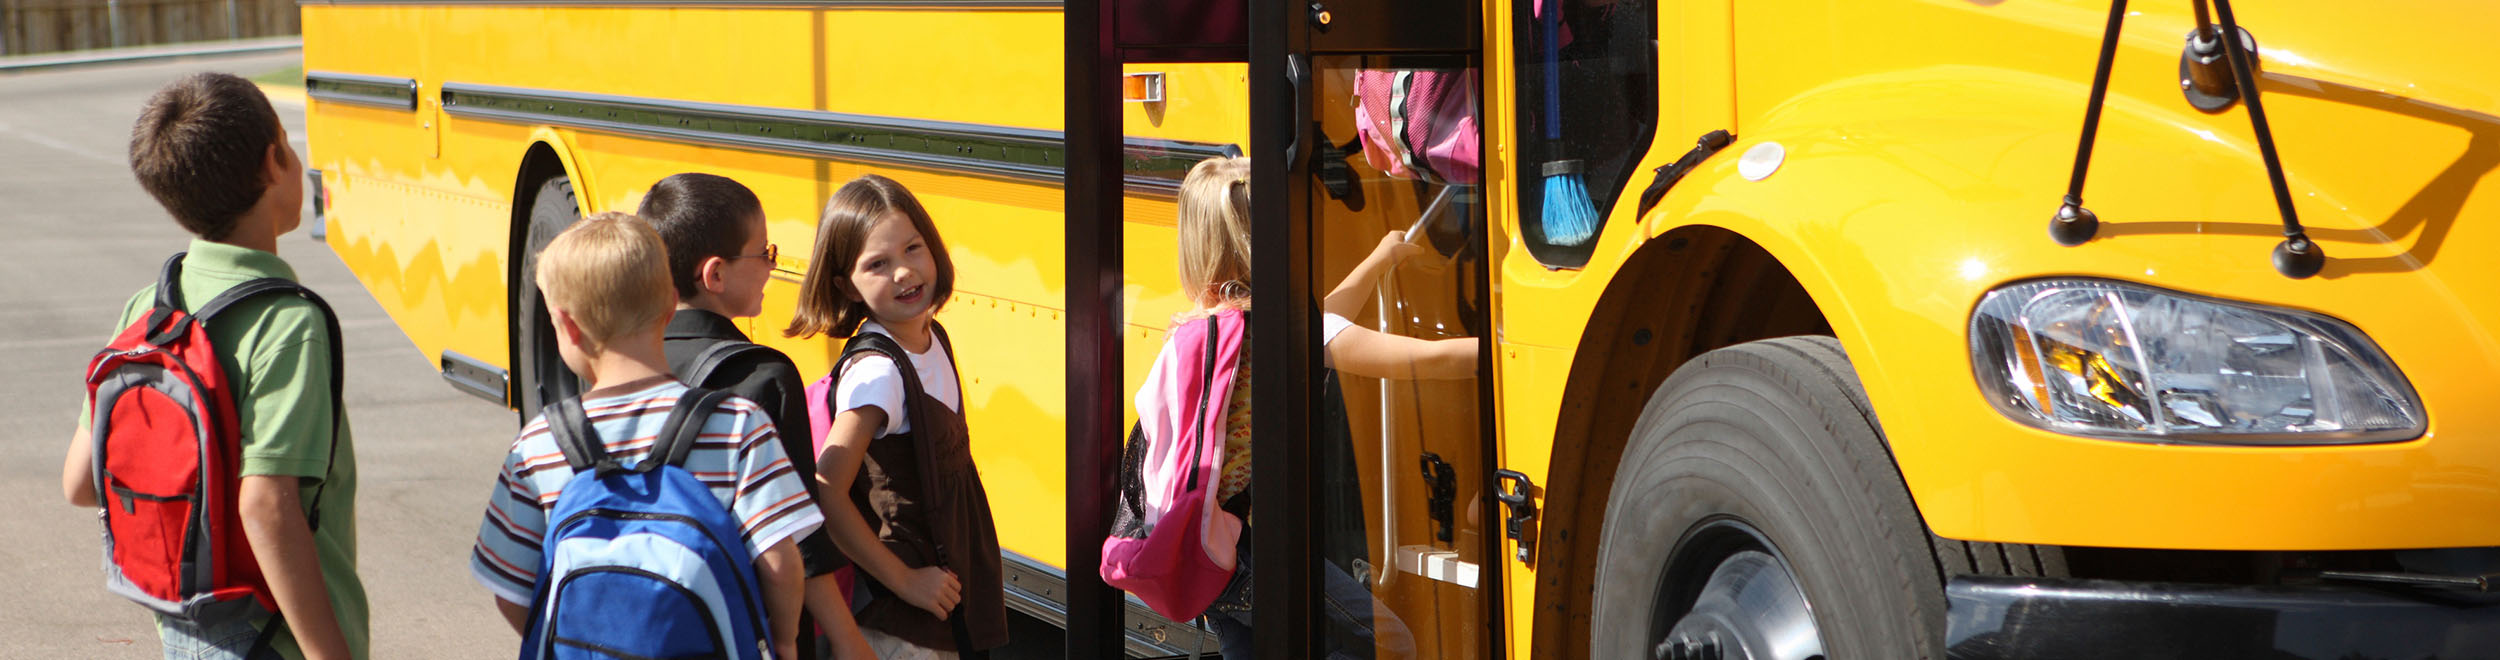 School Bus Transportation News And Events